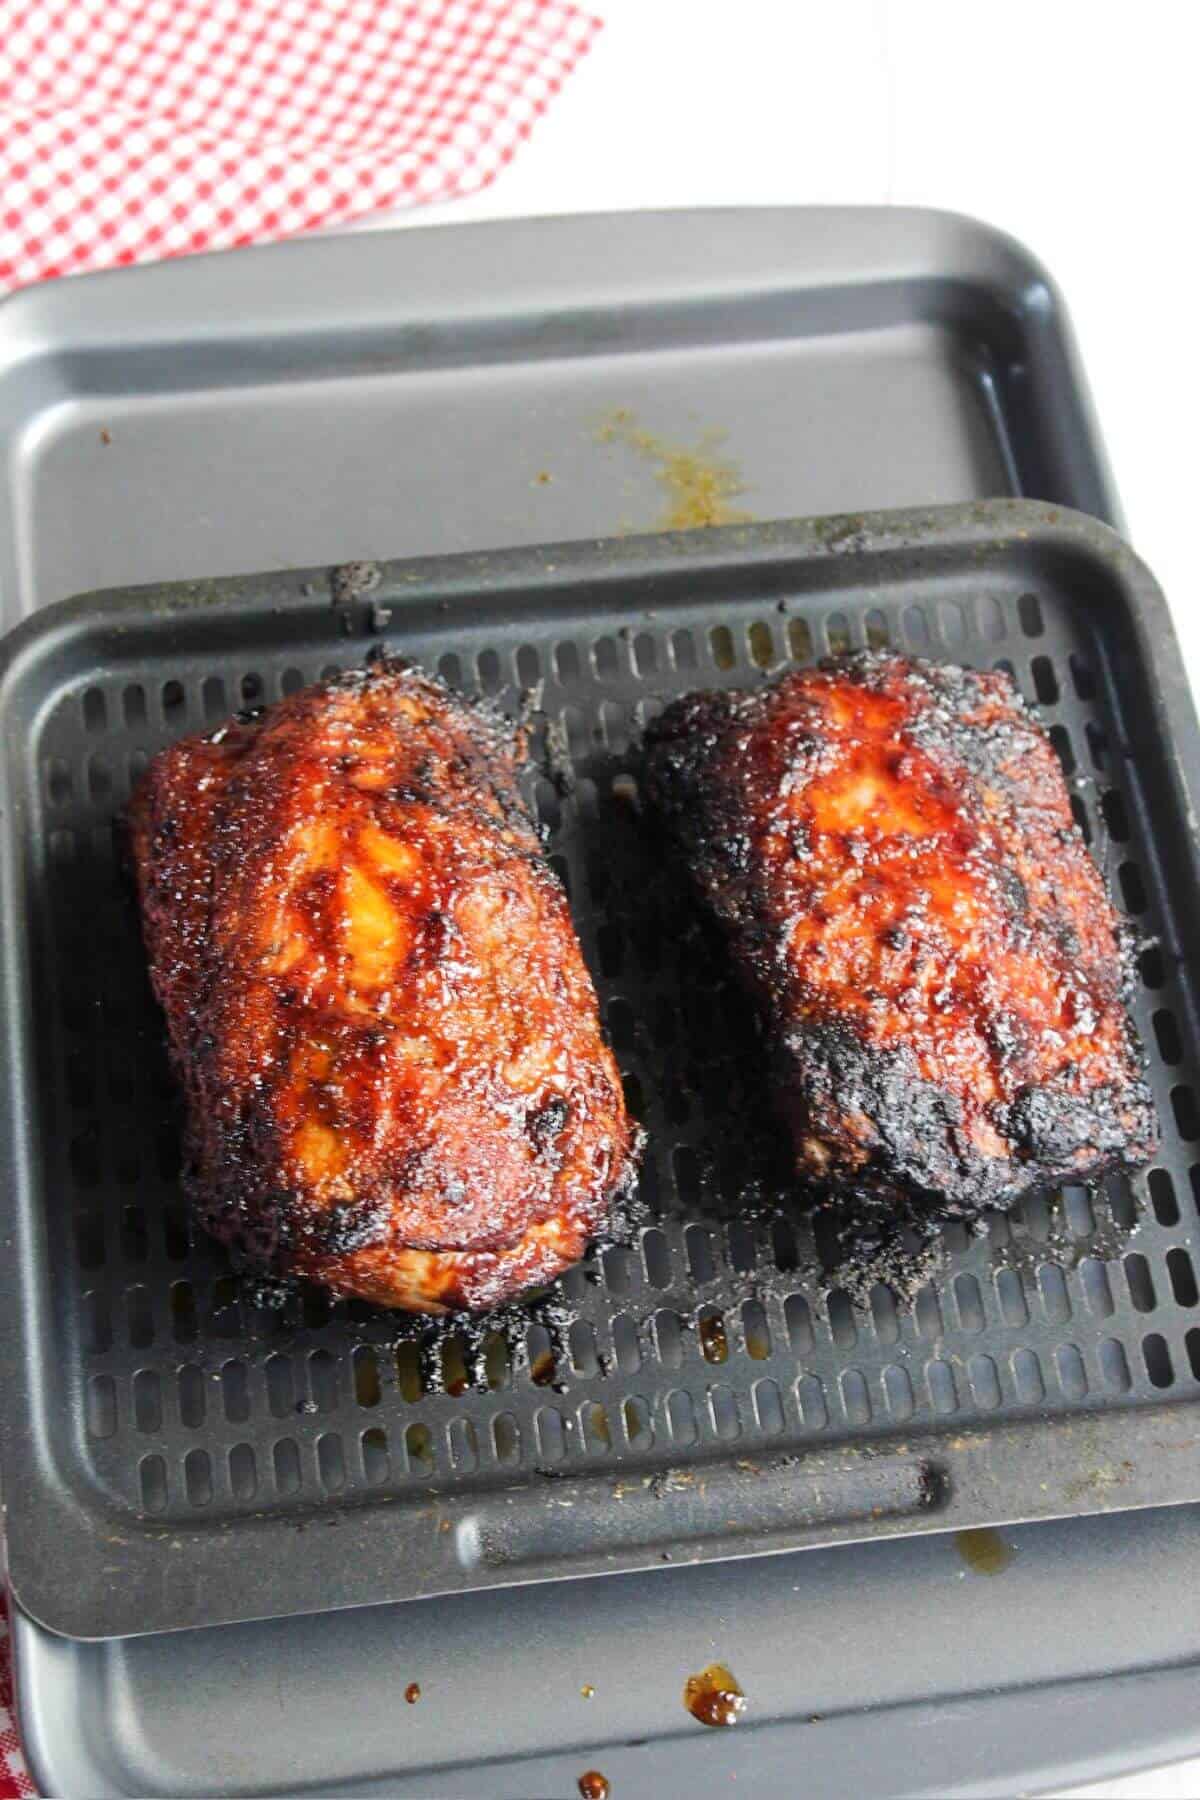 Two pieces of BBQ pork ribs on an air fryer tray.